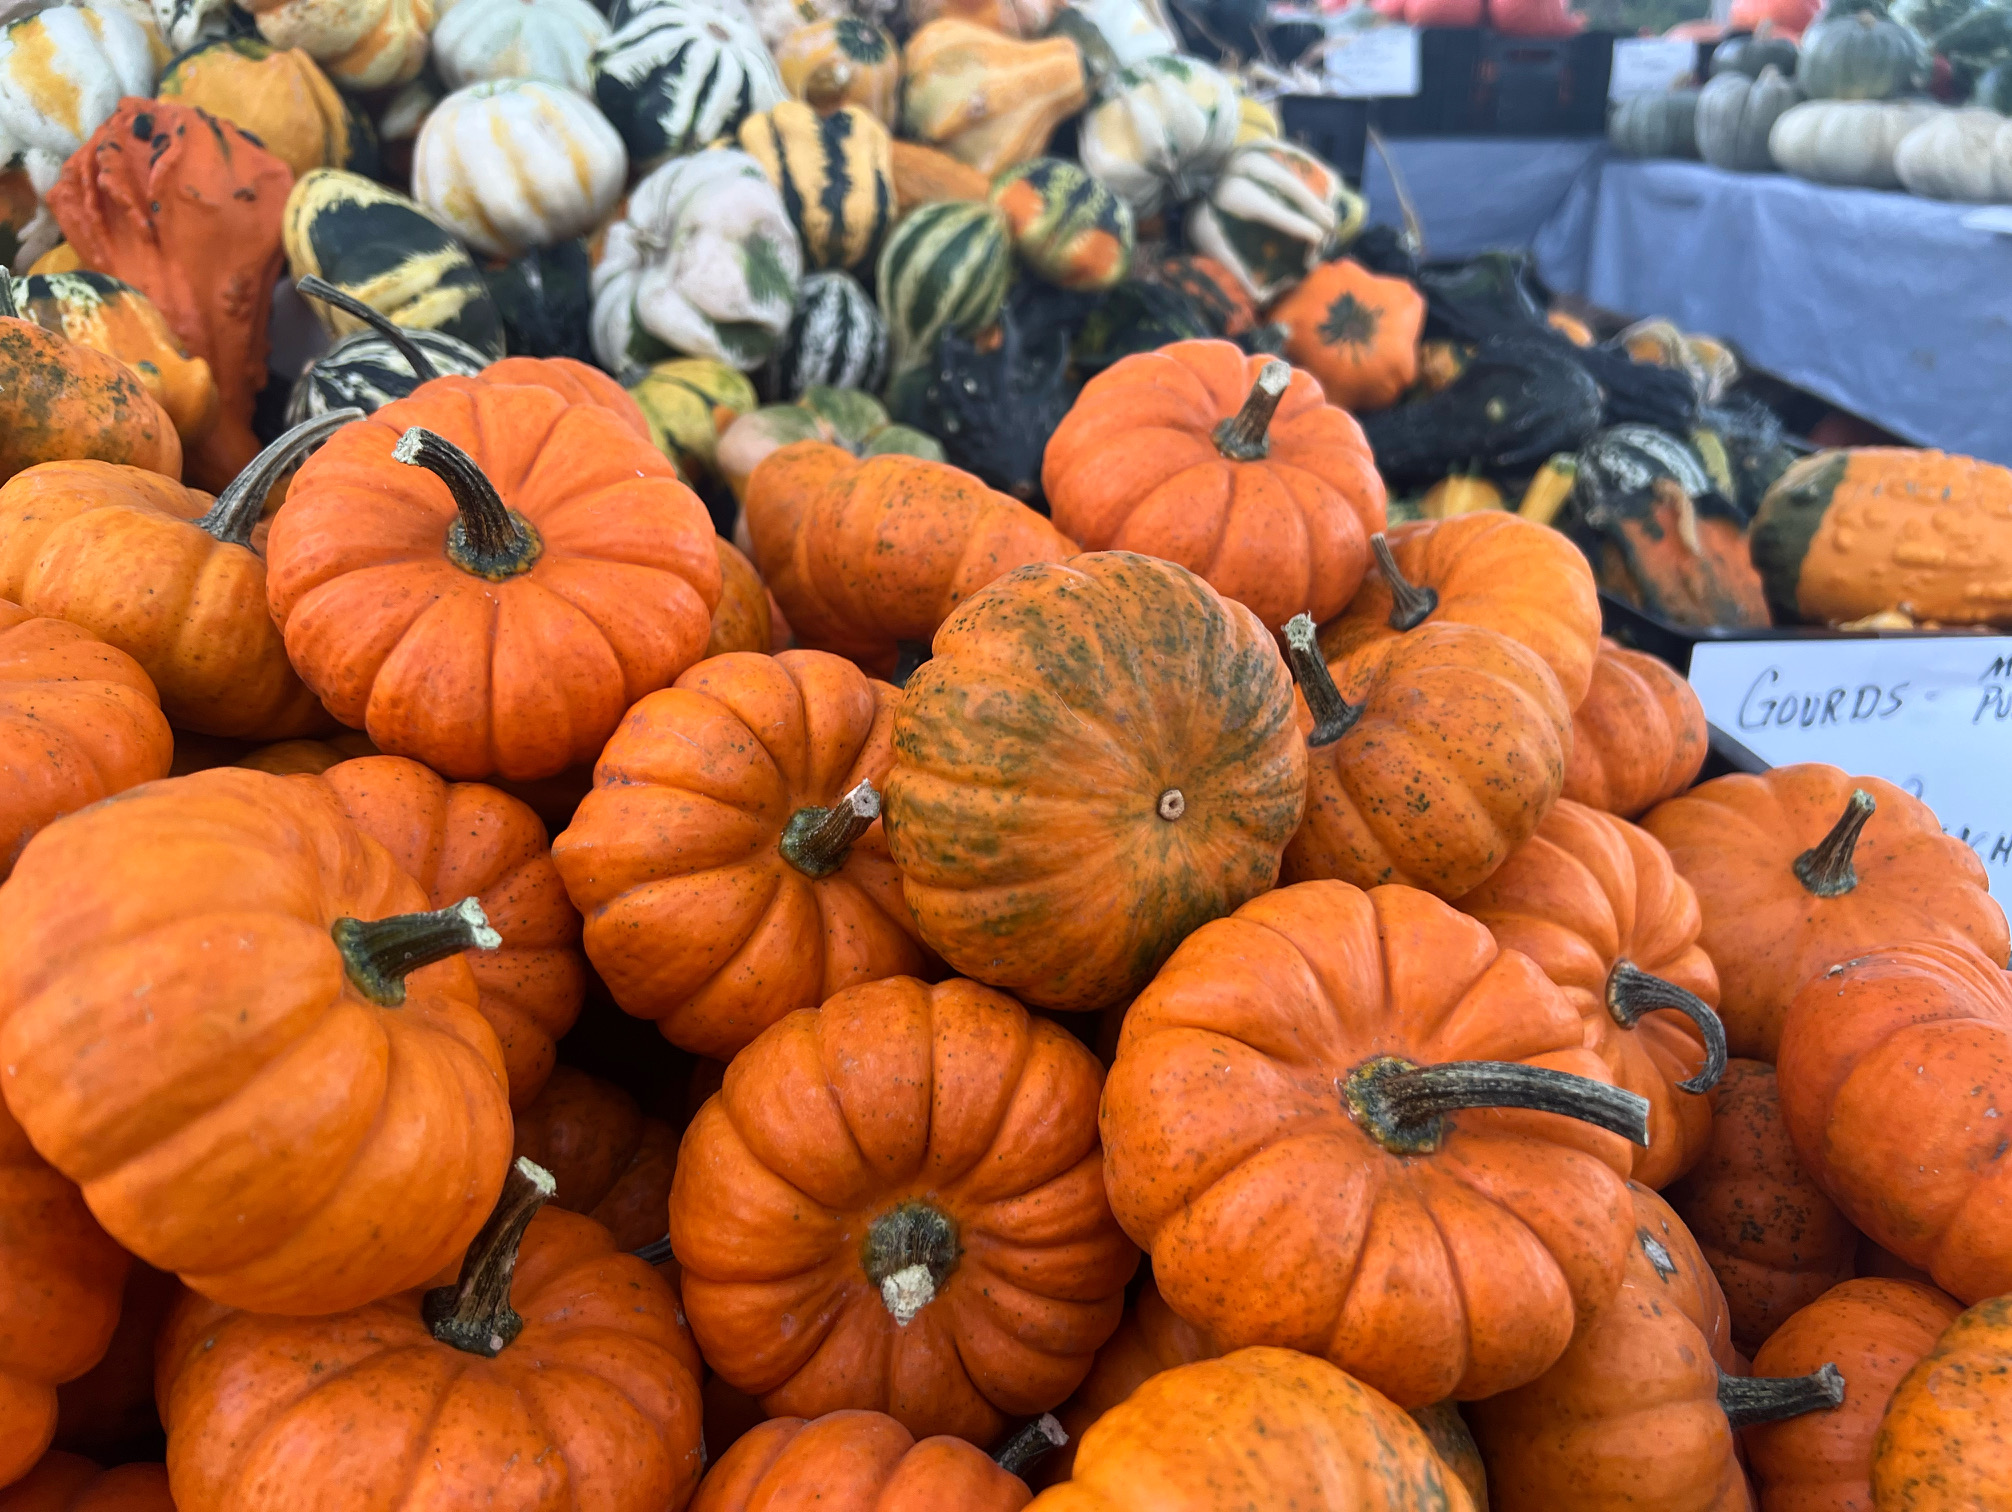 A variety of pumpkins and gourds are for sale by Moore Family Farm. Photo by Alyssa Buckley.